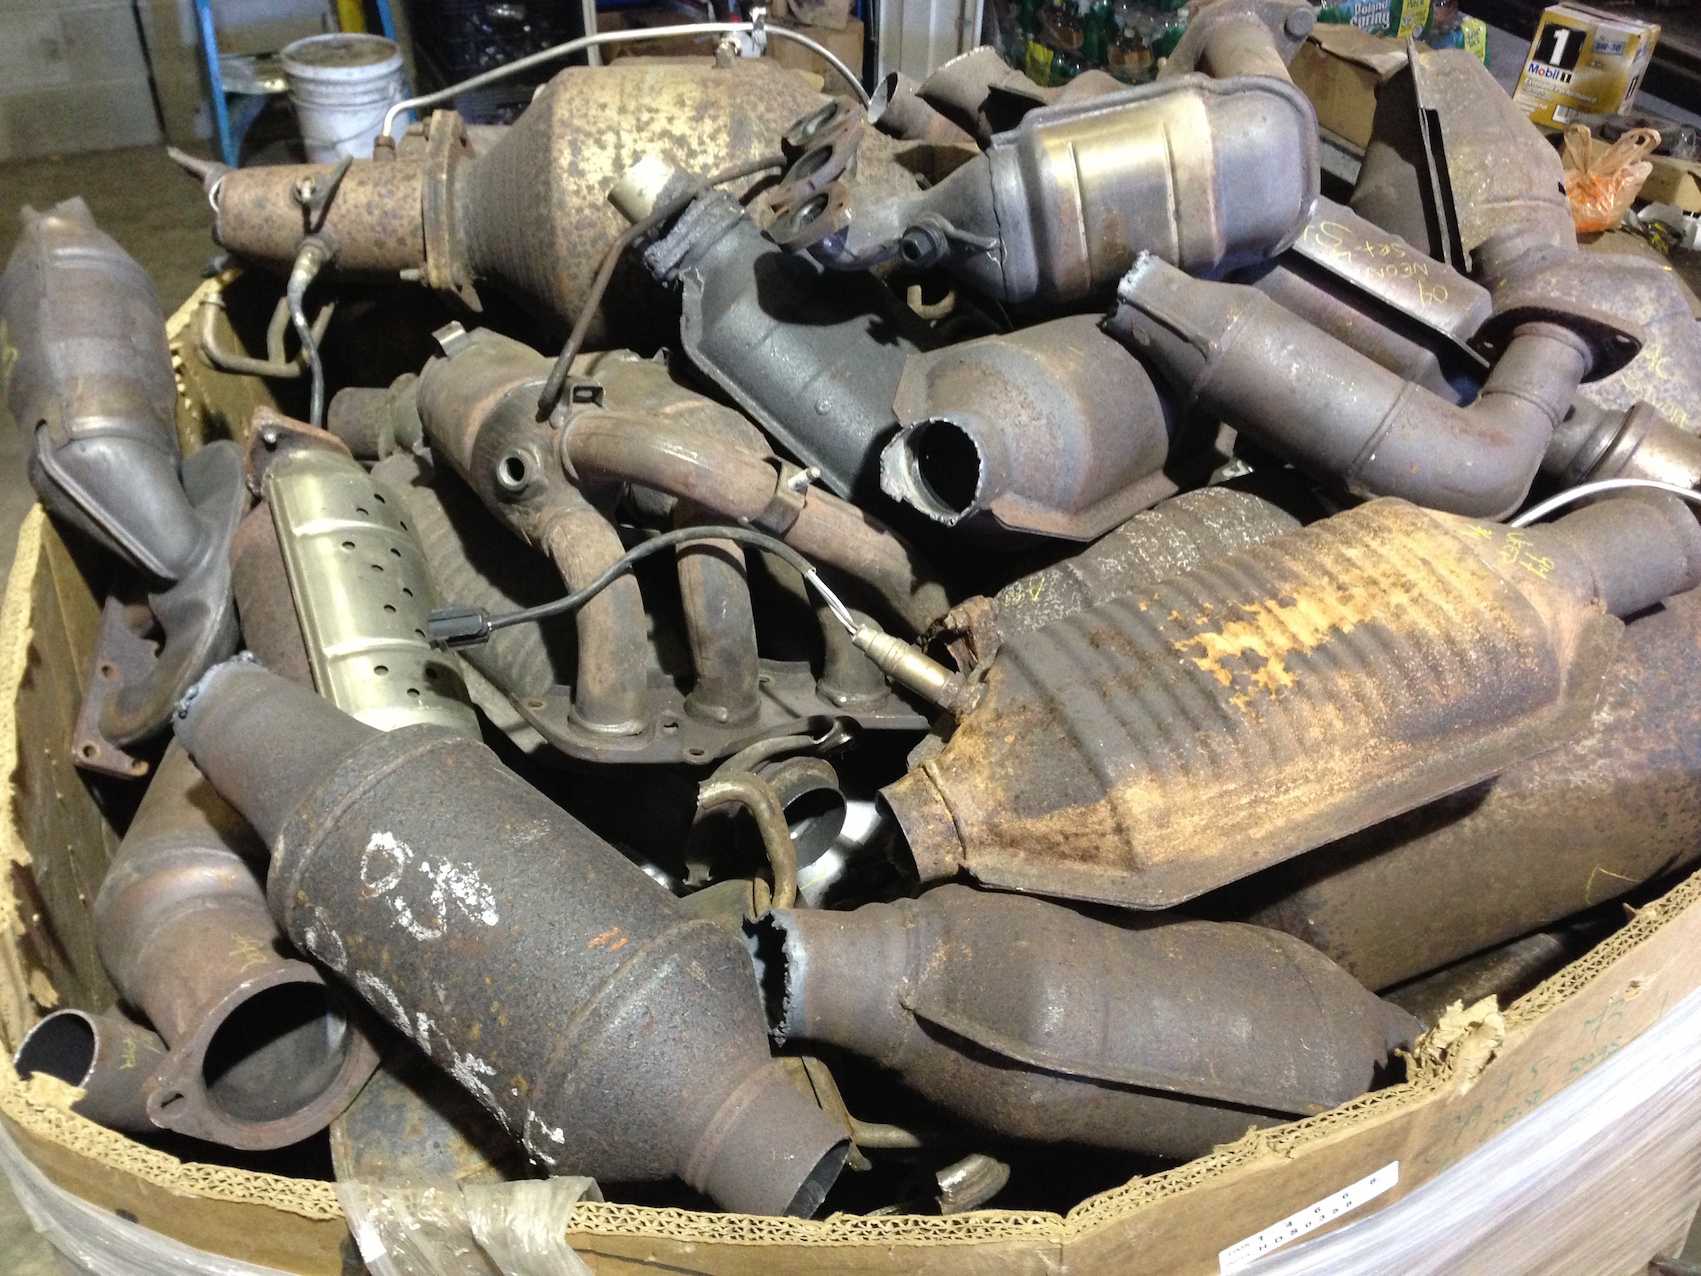 Scrap Catalytic Converters - What is the Value, and Why?